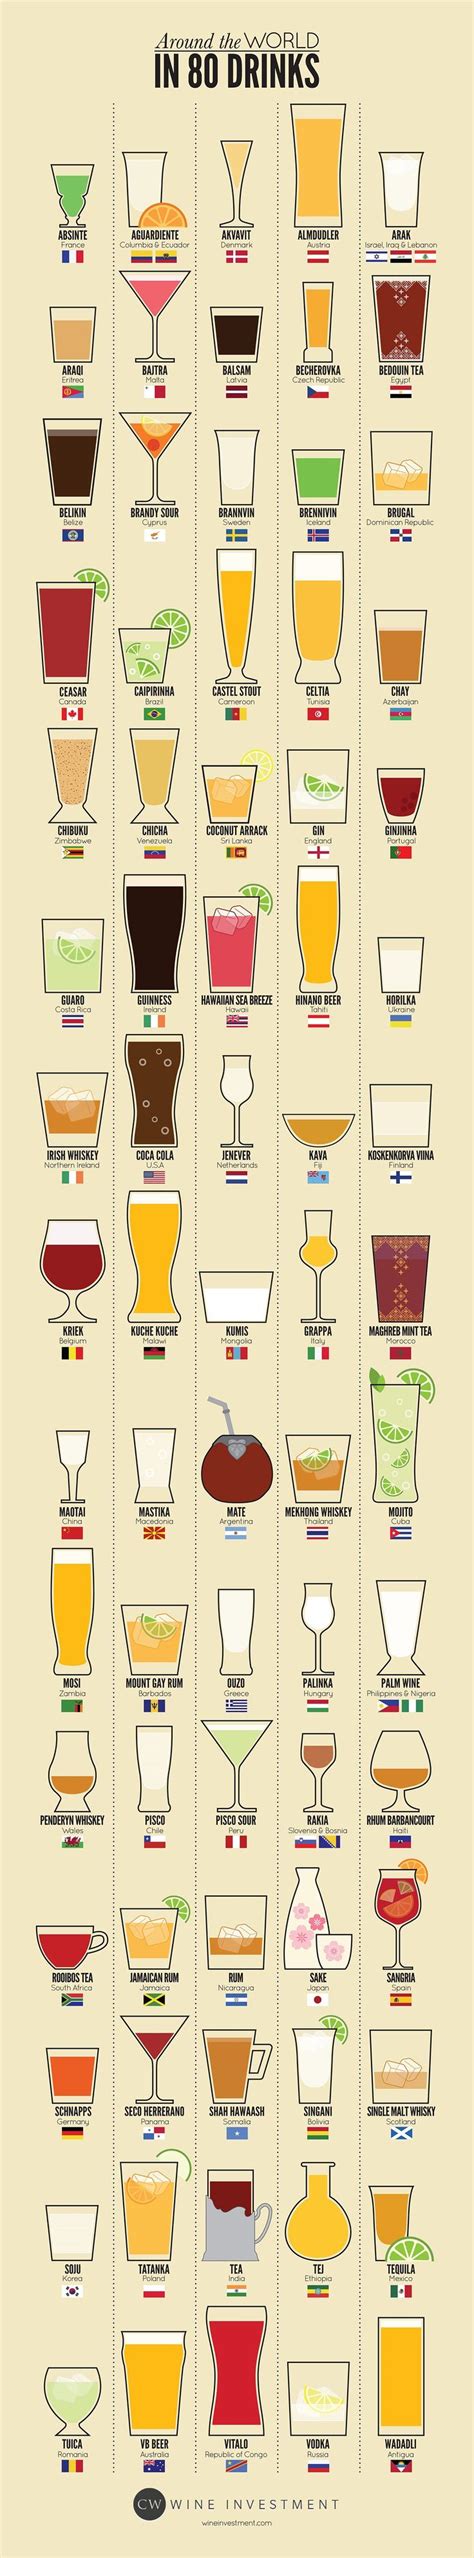 The Most Iconic Beverage In 80 Countries Around The World Drinks